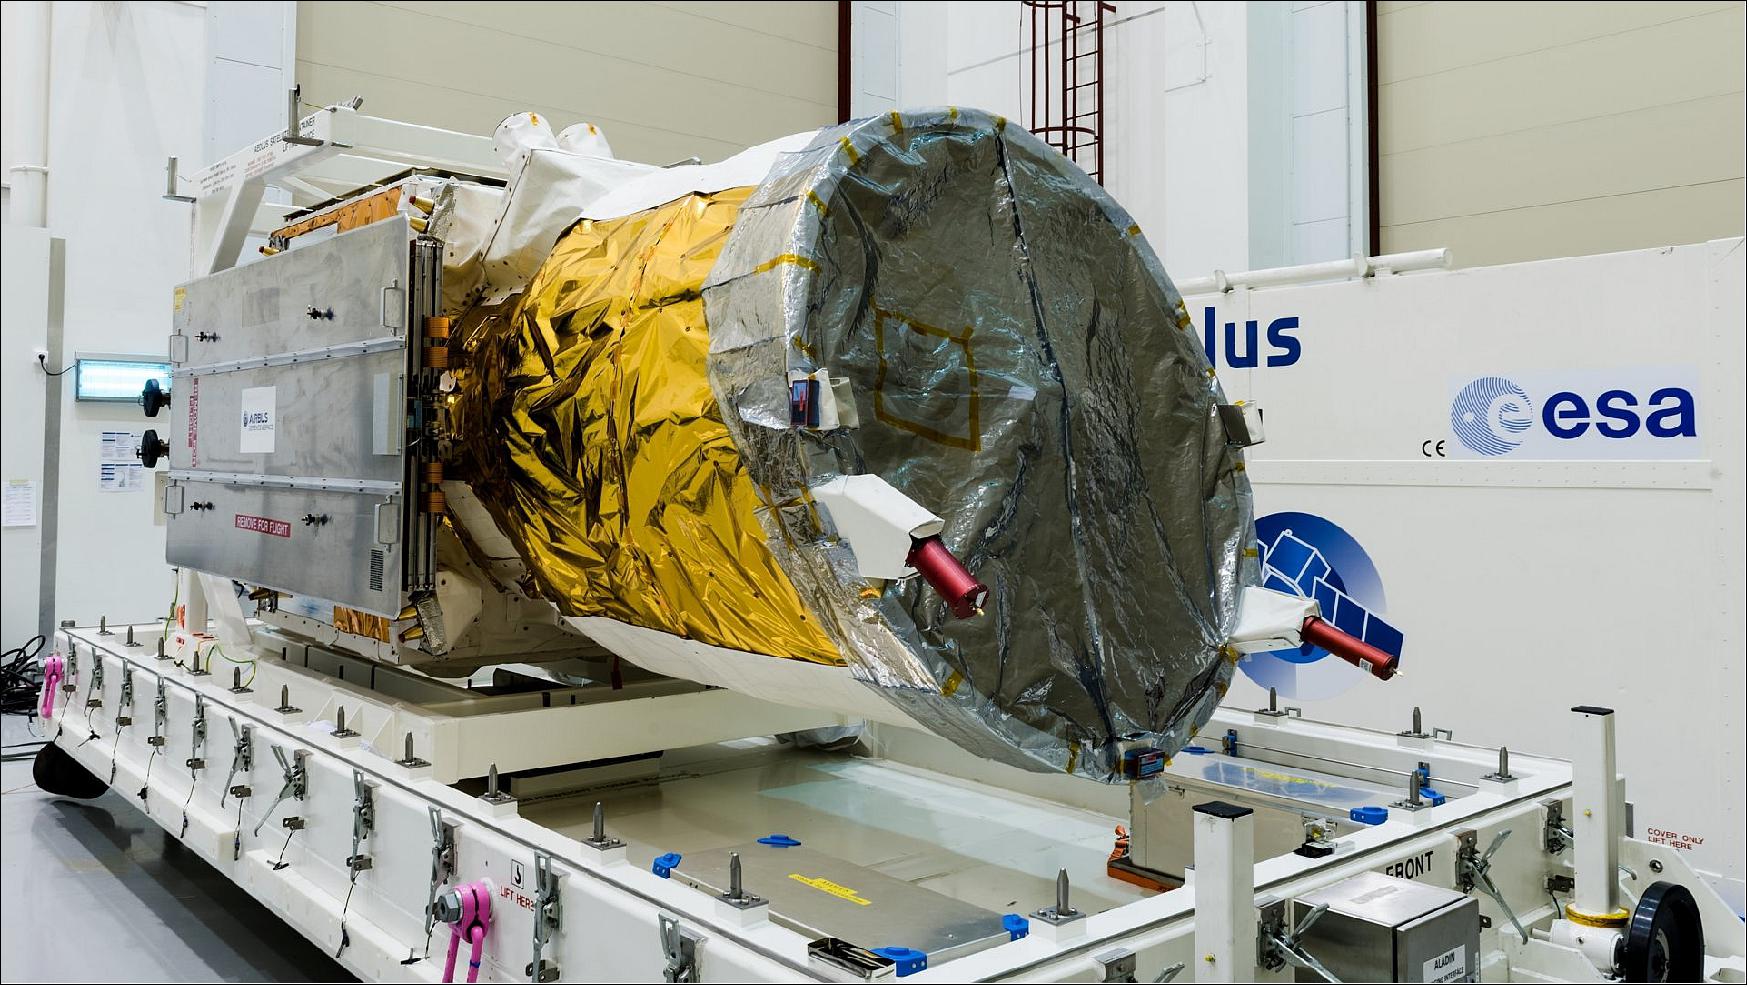 Figure 72: Before ESA’s Aeolus satellite is packed up and shipped to French Guiana for liftoff in August, media representatives had the chance to see this wind measuring Earth Explorer satellite standing proud in the Airbus Defence and Space cleanroom in Toulouse, France (image credit: ESA, M. Pedoussaut)